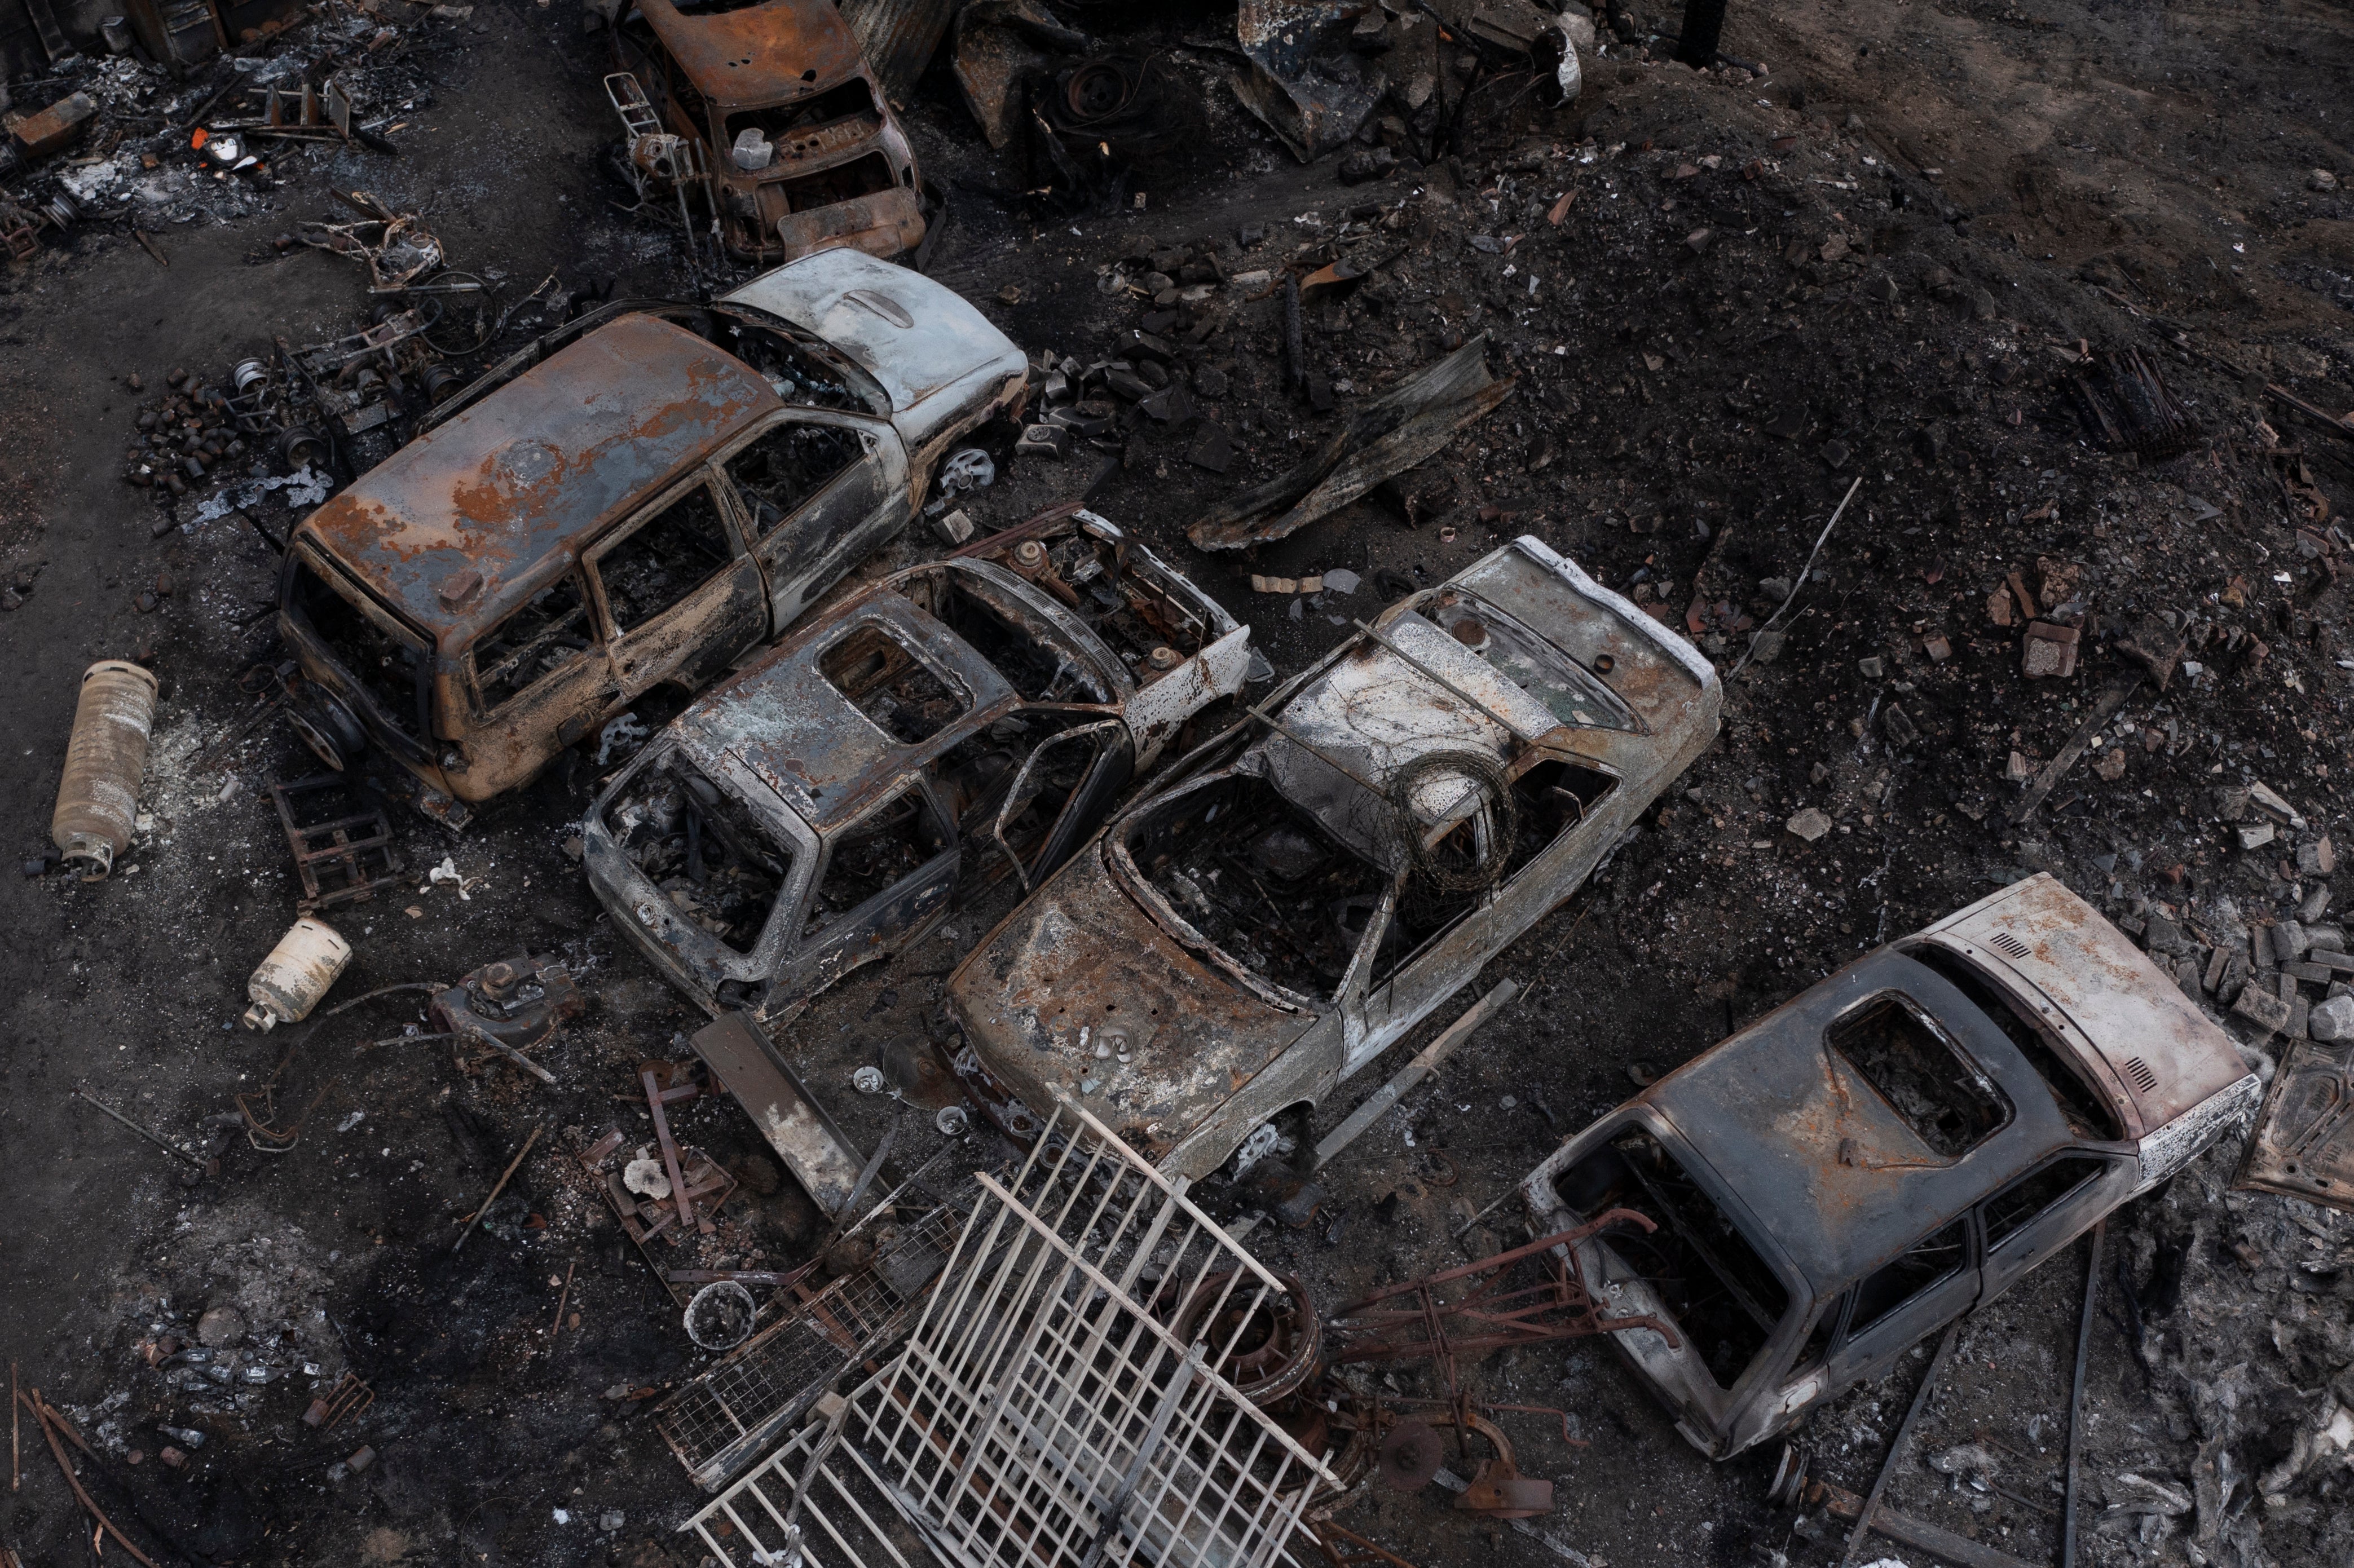 Cars destroyed by fire in Wennington, Greater London.